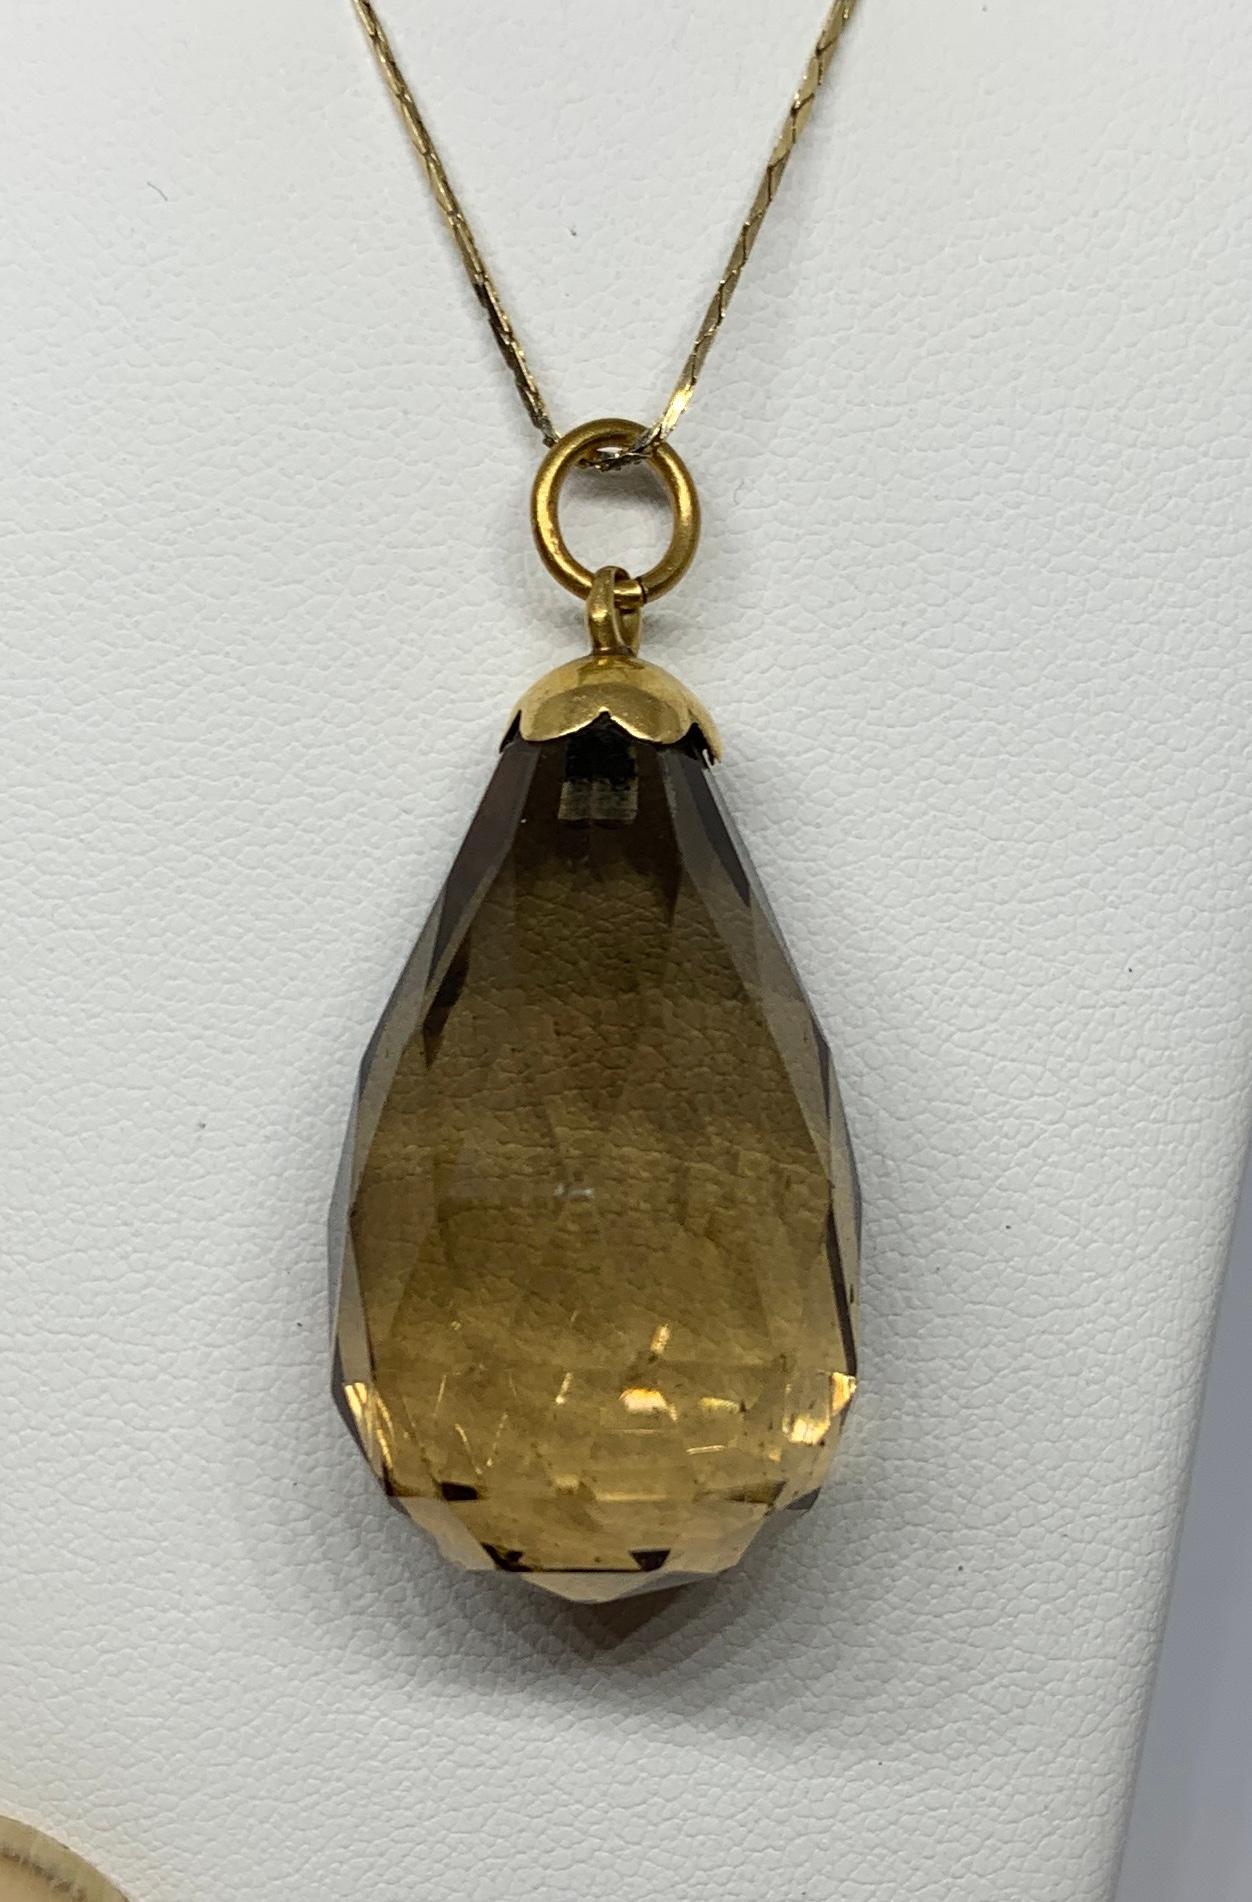 This is a classic pear shape Briolette Cut faceted Smoky Quartz Pendant Drop in 14 Karat Yellow Gold in a wonderful large size.  The beautiful smoky quartz is wonderfully faceted and is set with a scalloped shape surmount in 14 Karat gold.   The